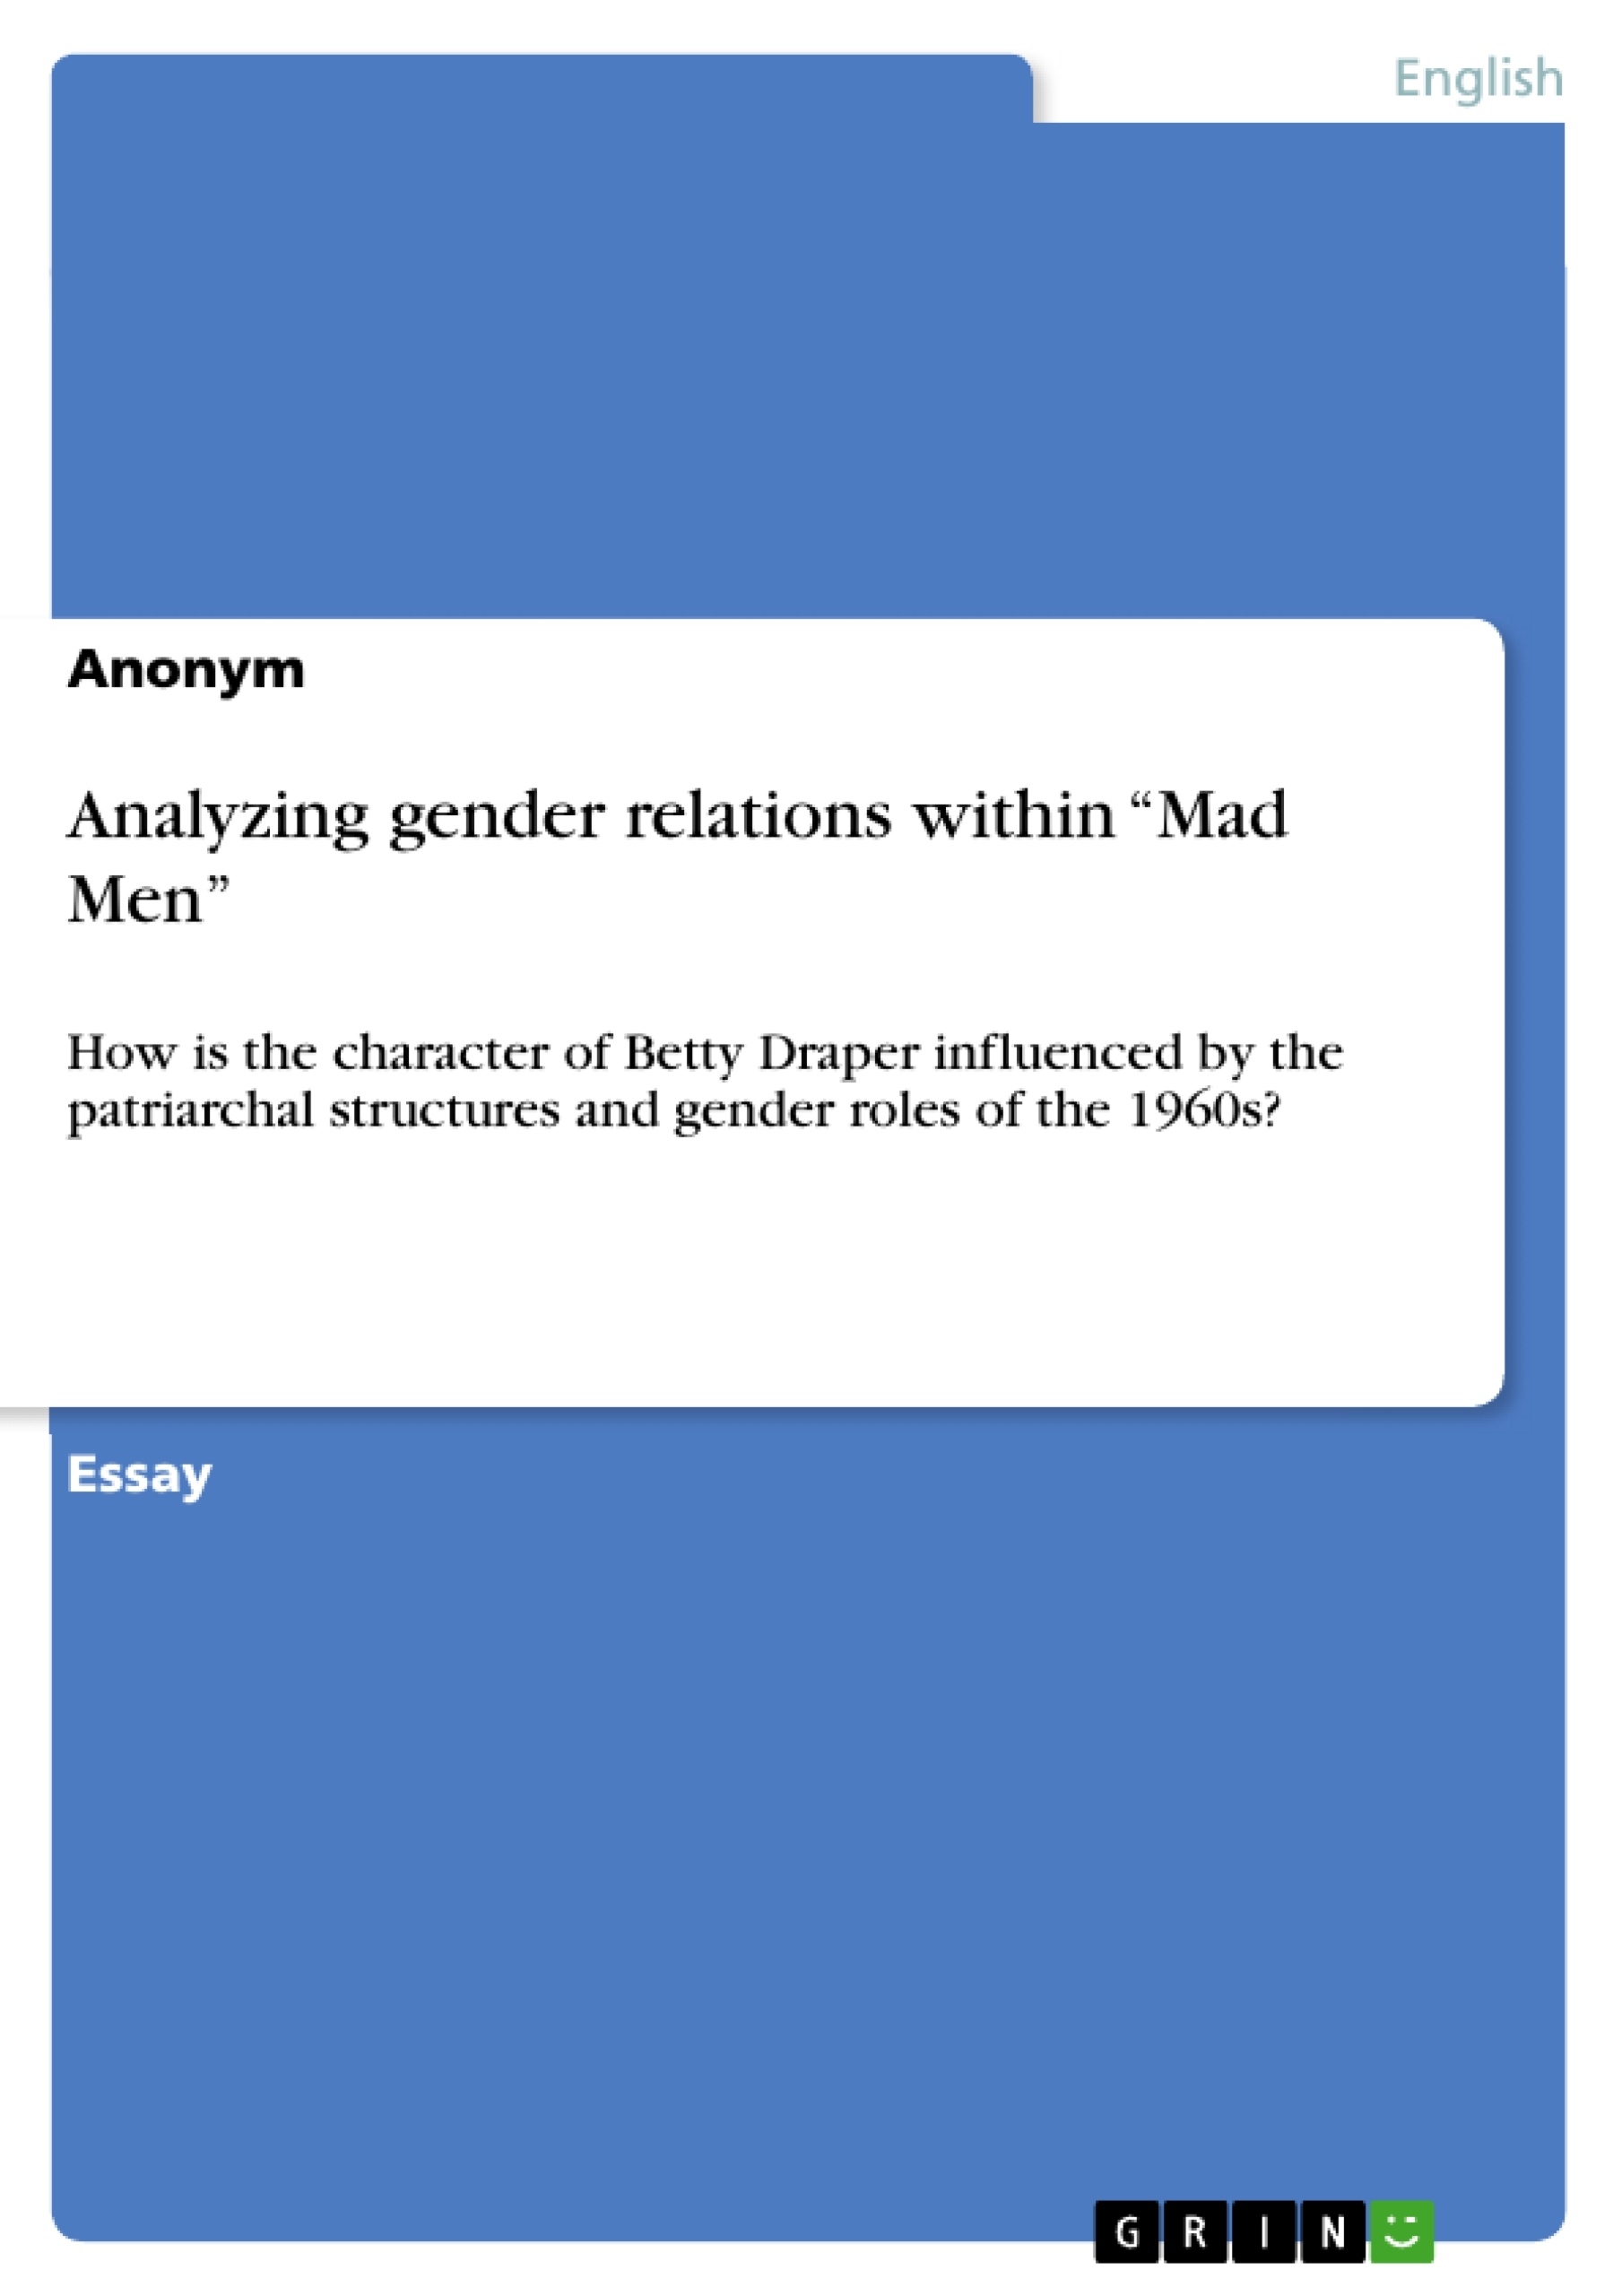 Título: Analyzing gender relations within “Mad Men”